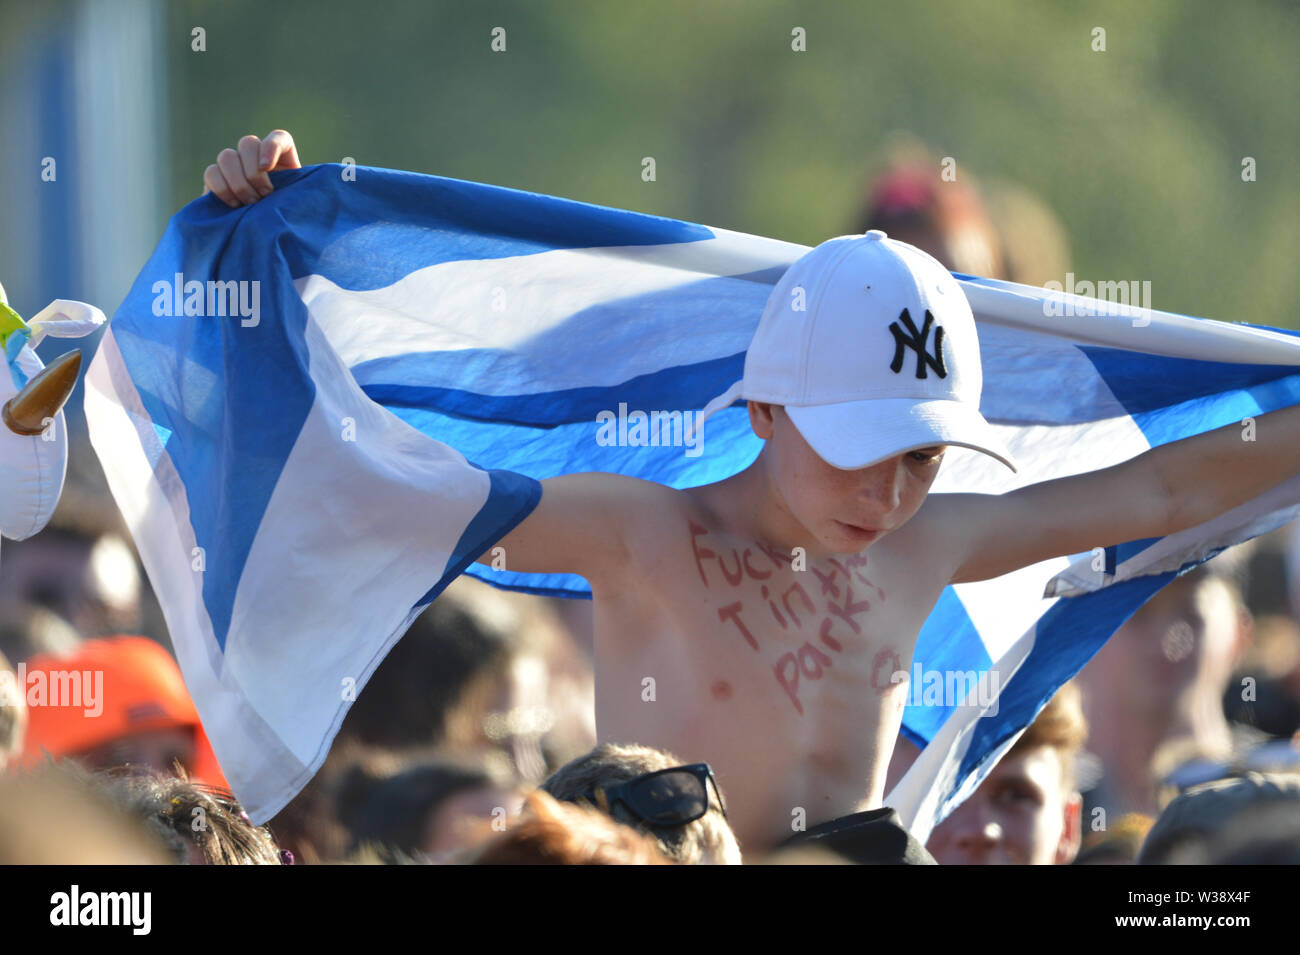 Glasgow, UK. 13 July 2019. Bastille live in Concert at TRNSMT Music Festival on the main stage. Dan Smith, lead vocalist takes the Main Stage. Credit: Colin Fisher/Alamy Live News Stock Photo